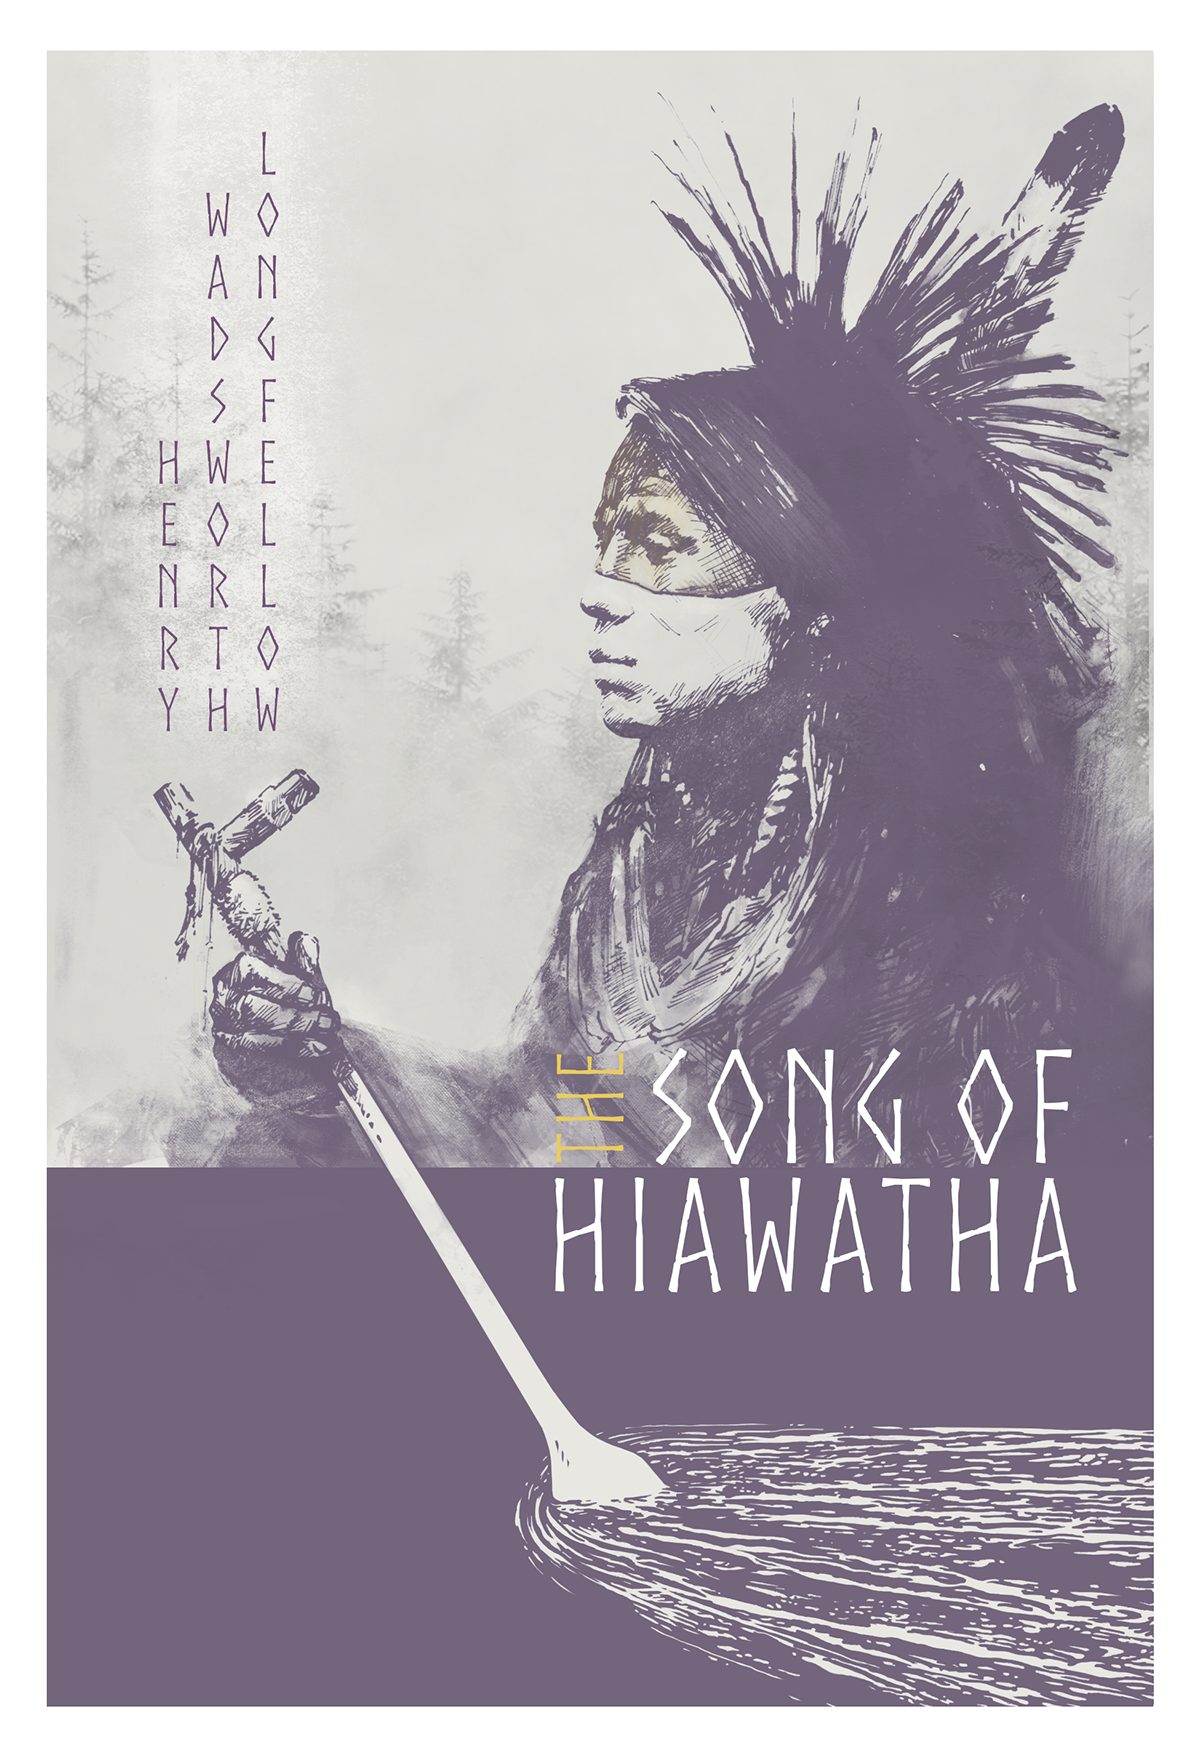 Adobe Portfolio book cover art book cover native american native people Hiawatha Song of Hiawatha henry wadsworth longfellow ILLUSTRATION  art Graphic Novel portrait classic book classic poem Poetry  Cover Art peace pipe OAR black gold purple White design graphic design  american classic